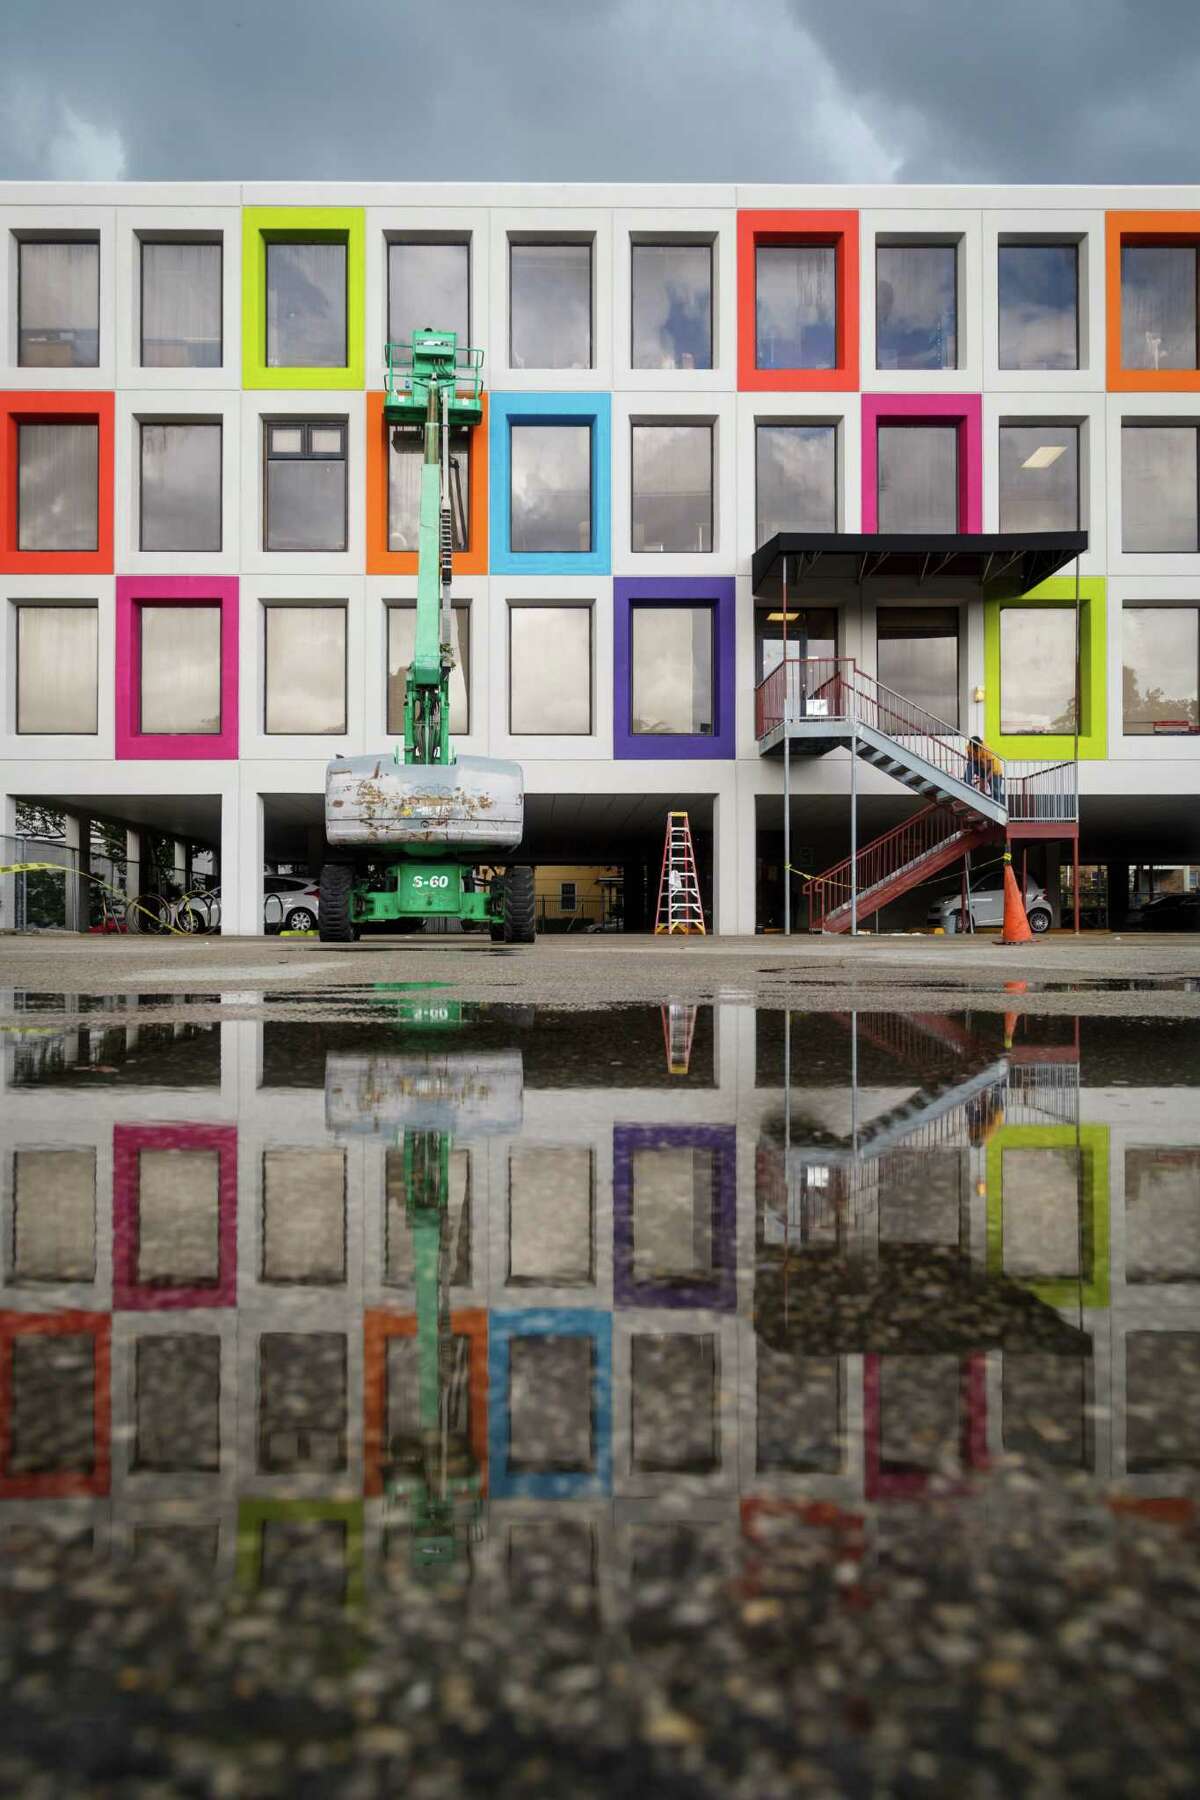 The Montrose Center has painted the exterior of their building with blocks of neon colors, Thursday, Sept. 19, 2013, in Houston. ( Michael Paulsen / Houston Chronicle )